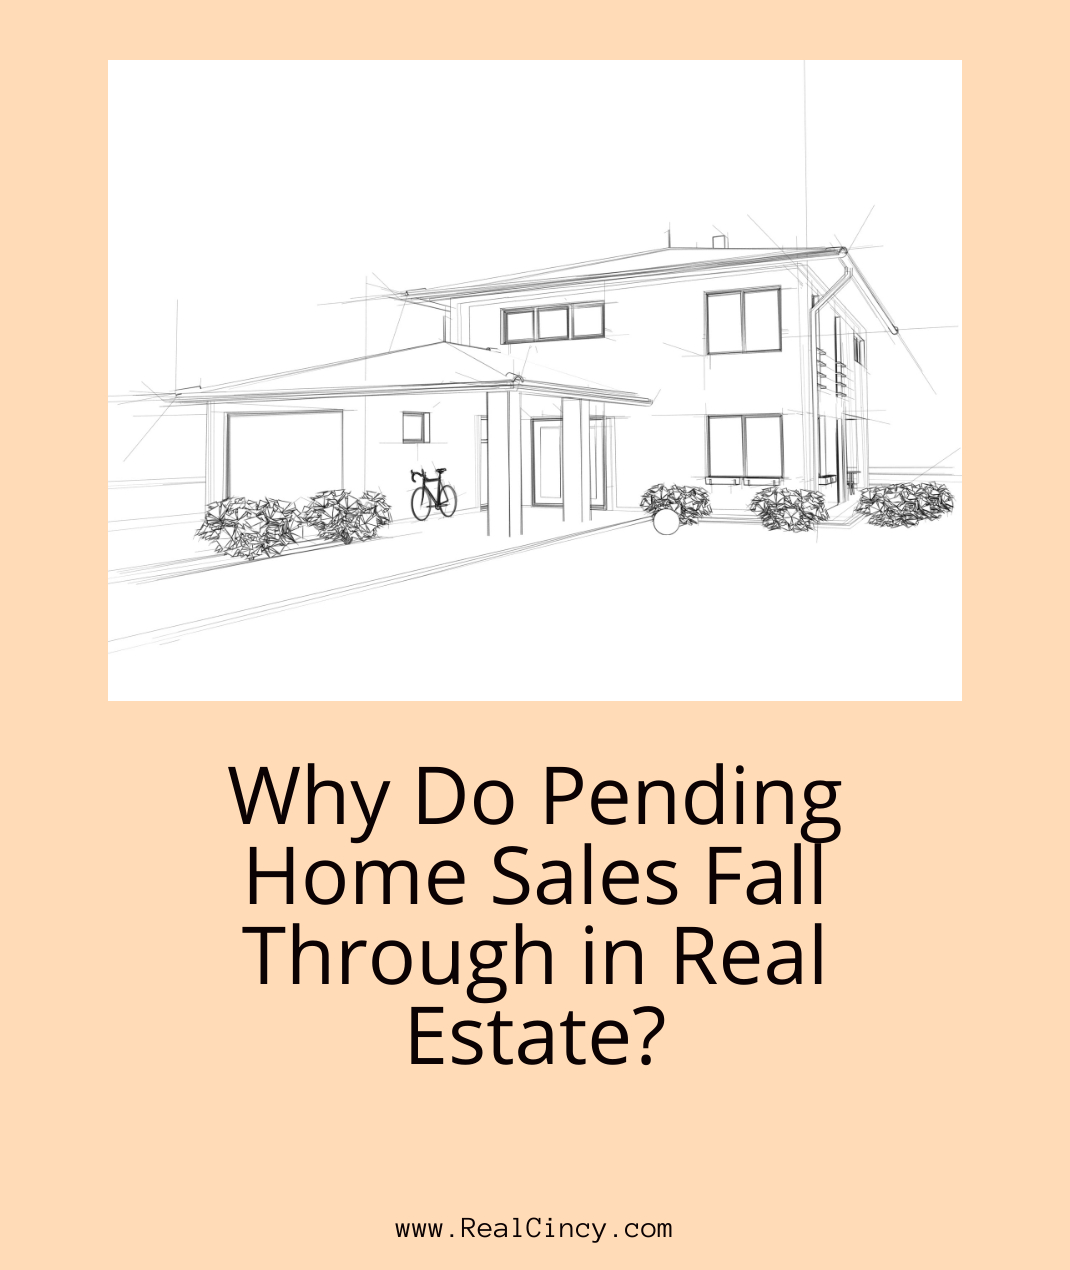 Why Do Pending Home Sales Fall Through in Real Estate?